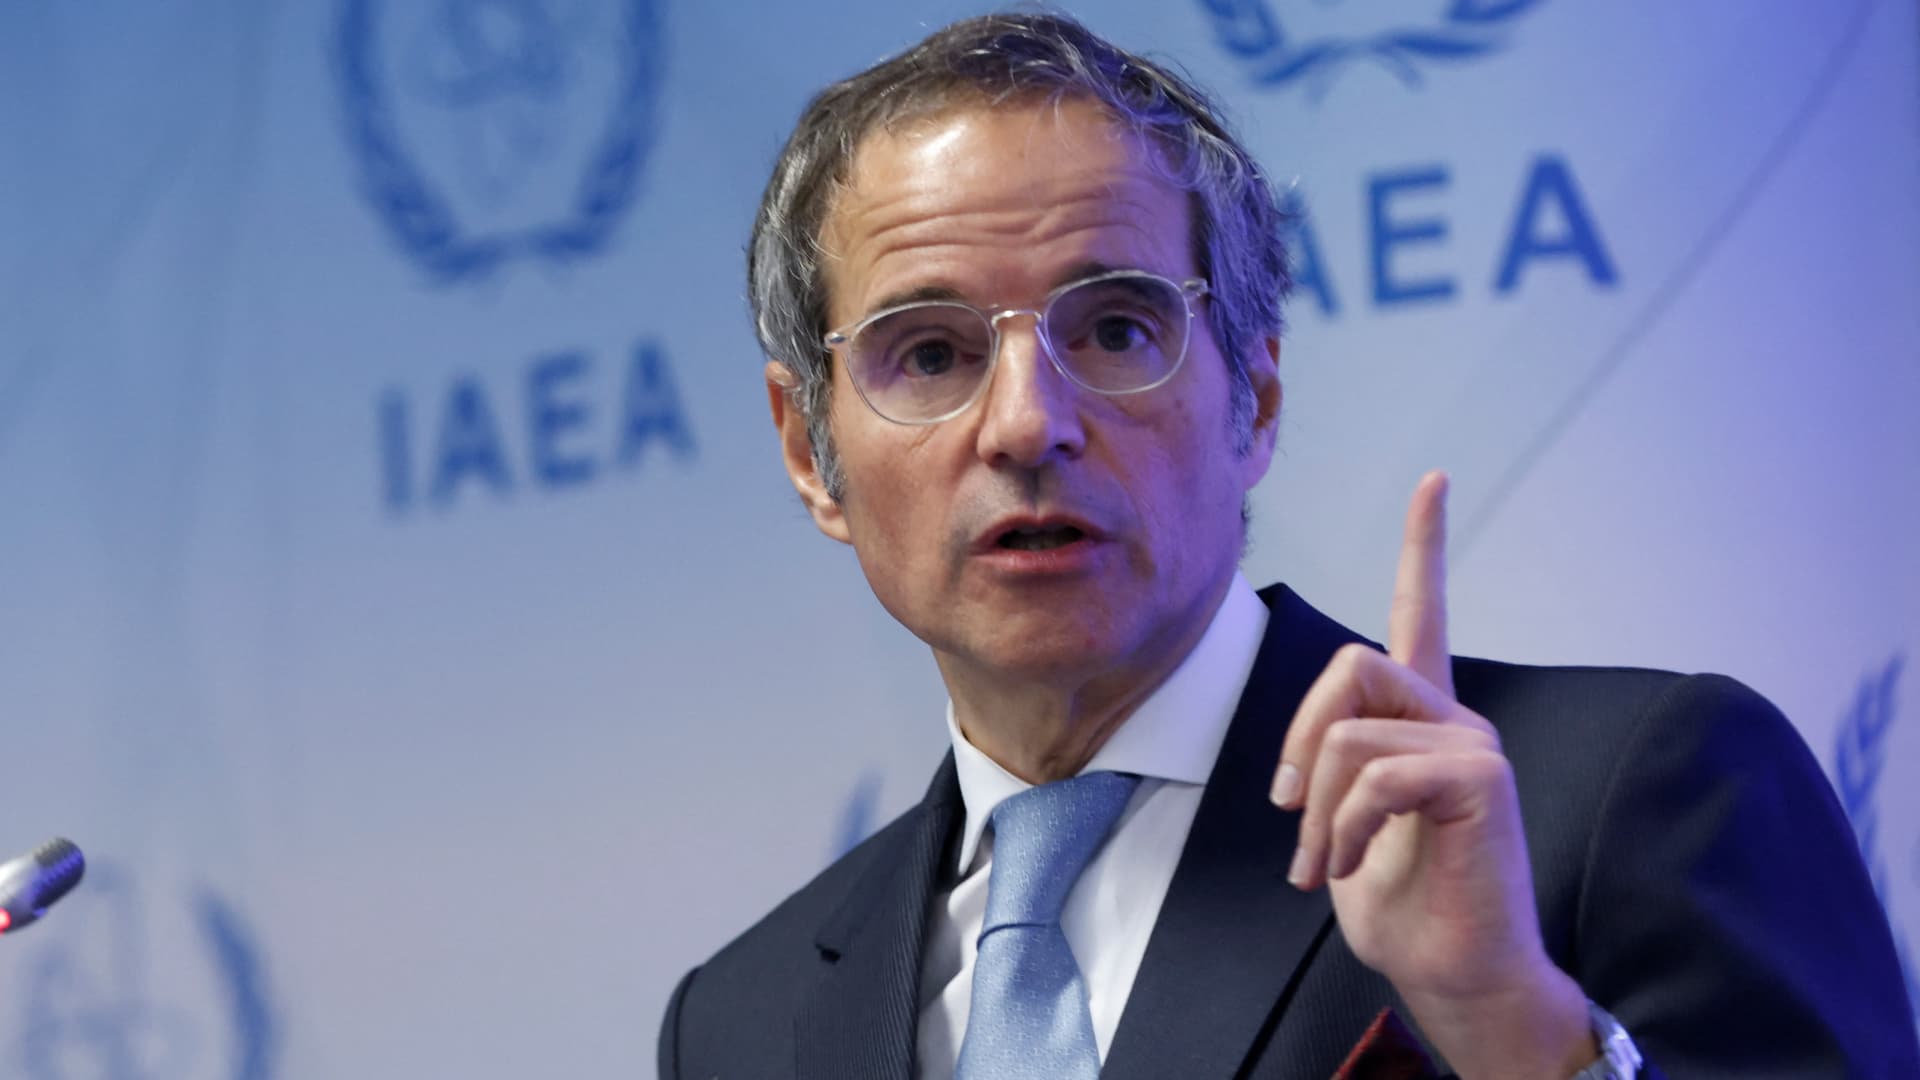 International Atomic Energy Agency (IAEA) Director General Rafael Grossi attends a news conference in Vienna, Austria March 4, 2022.